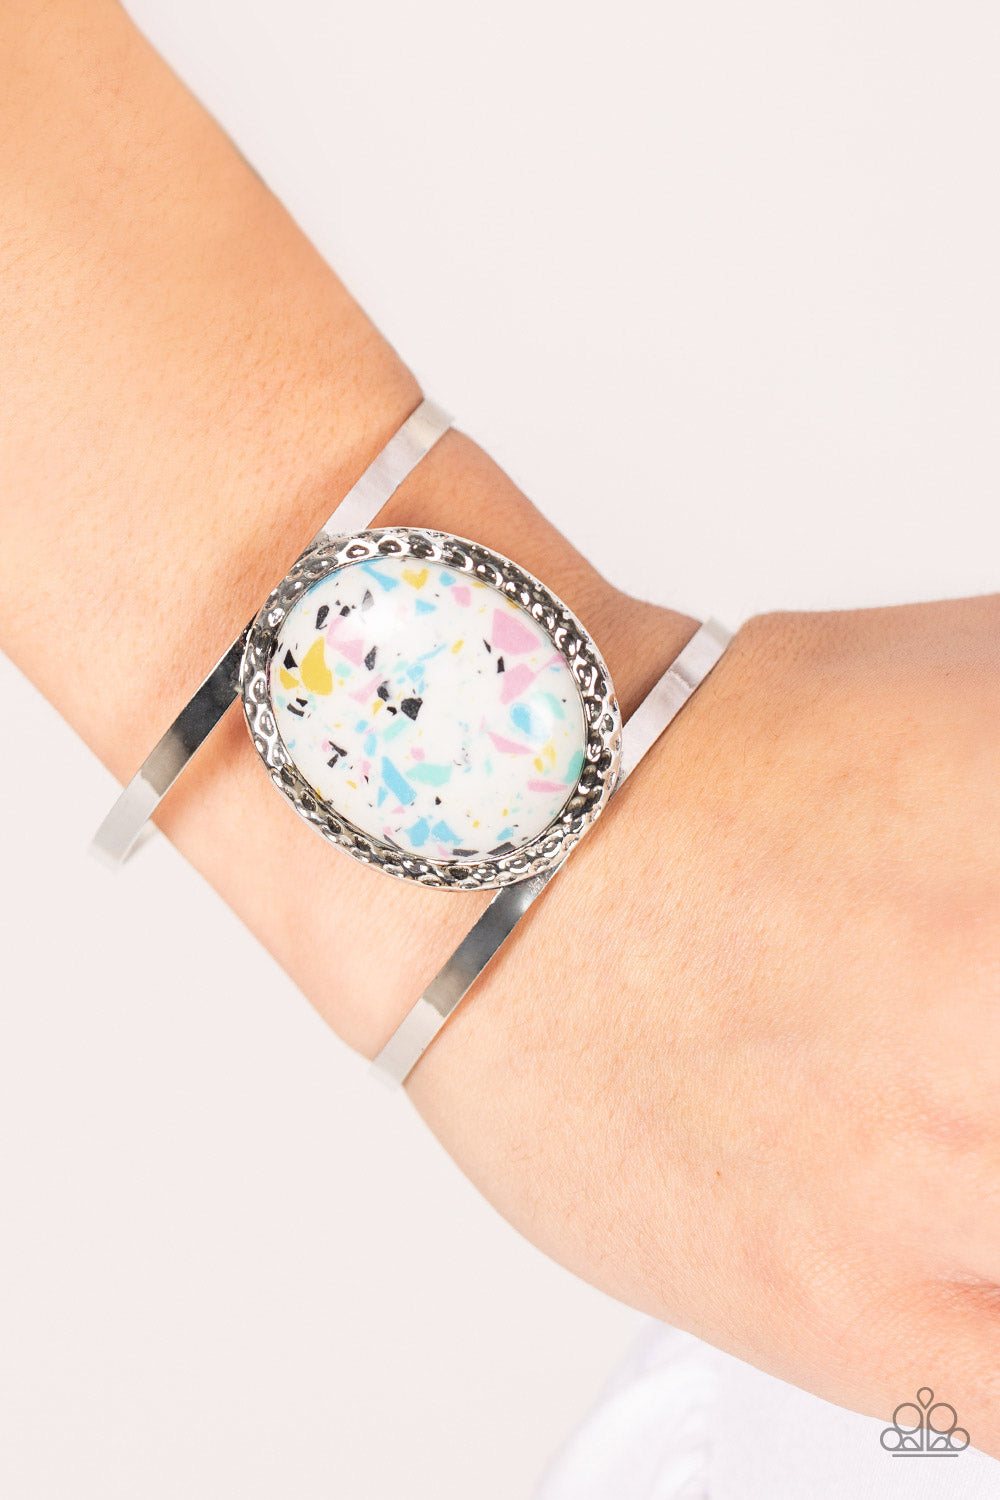 Tantalizing Terrazzo - Multi Stone Bracelets featuring a colorful terrazzo finish, an oversized multi-colored stone is pressed into the center of a hammered silver frame atop a layered silver cuff for a modern stone look.  Sold as one individual bracelet.